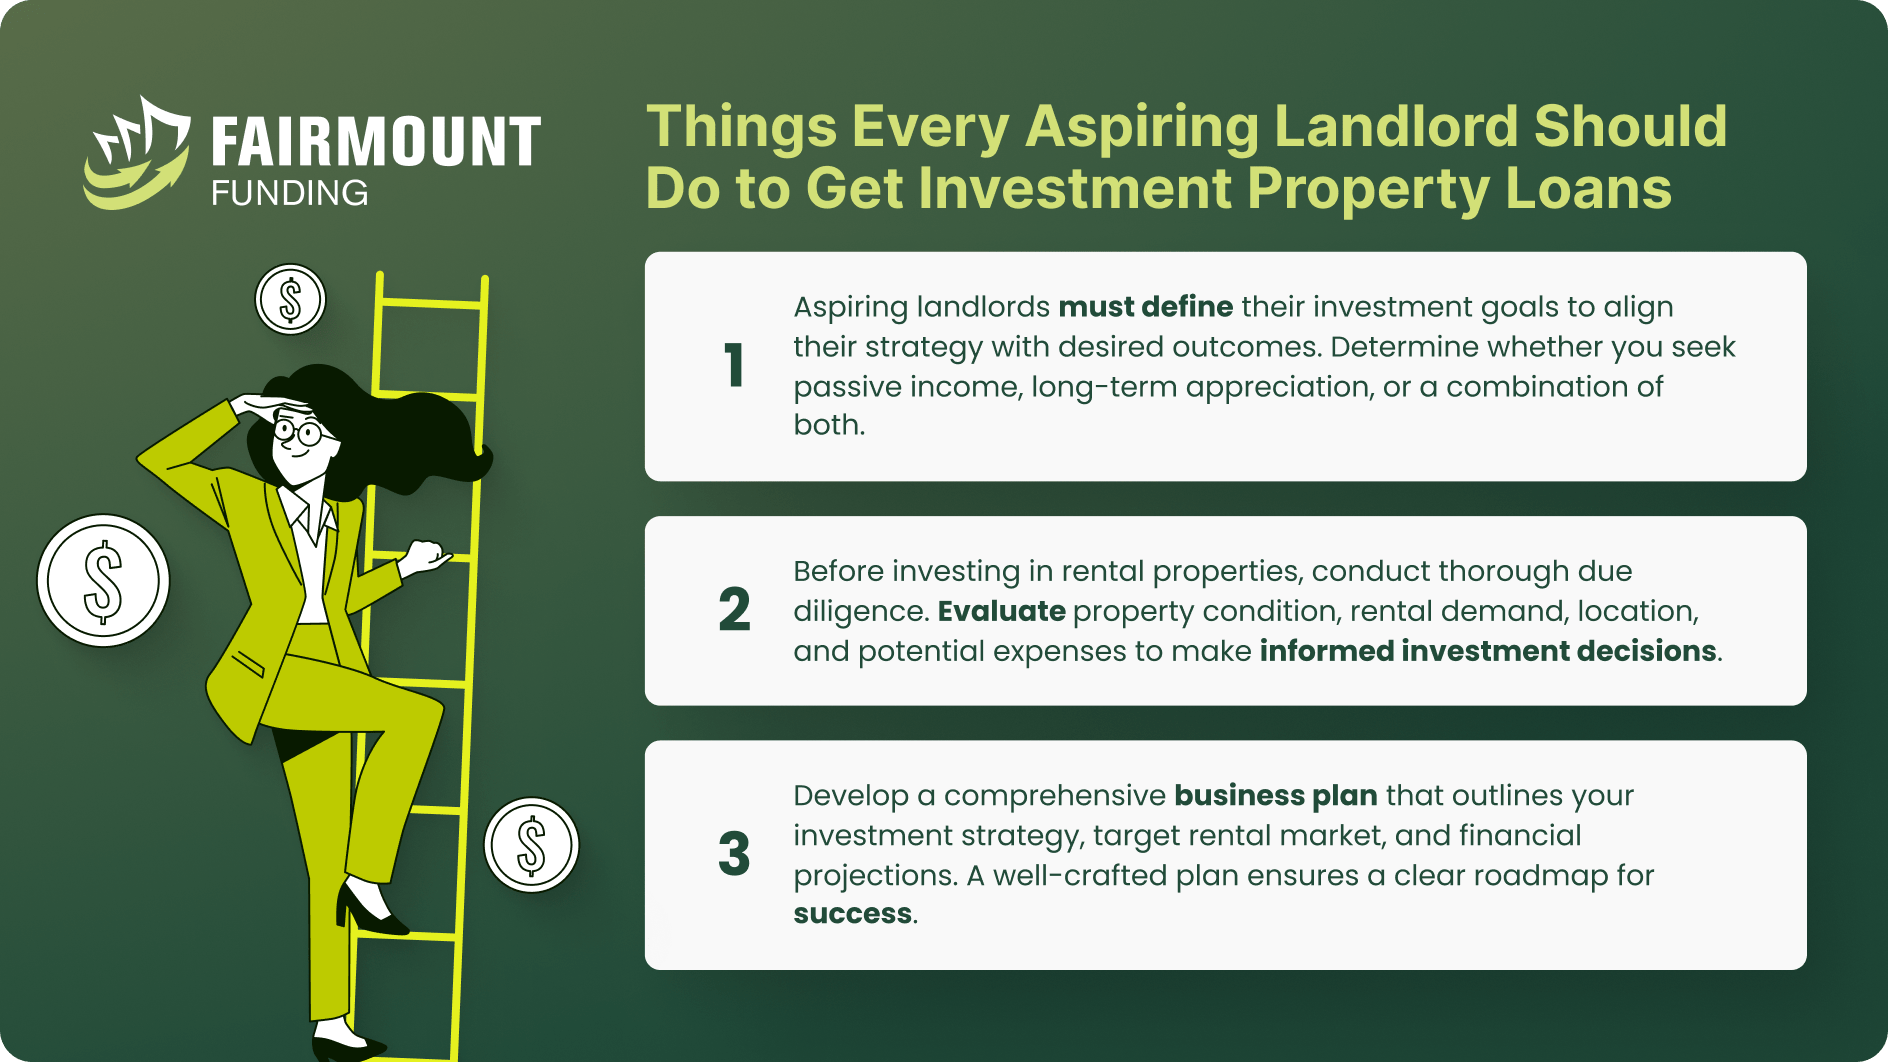 6 things every aspiring landlord should do to get investment property loans